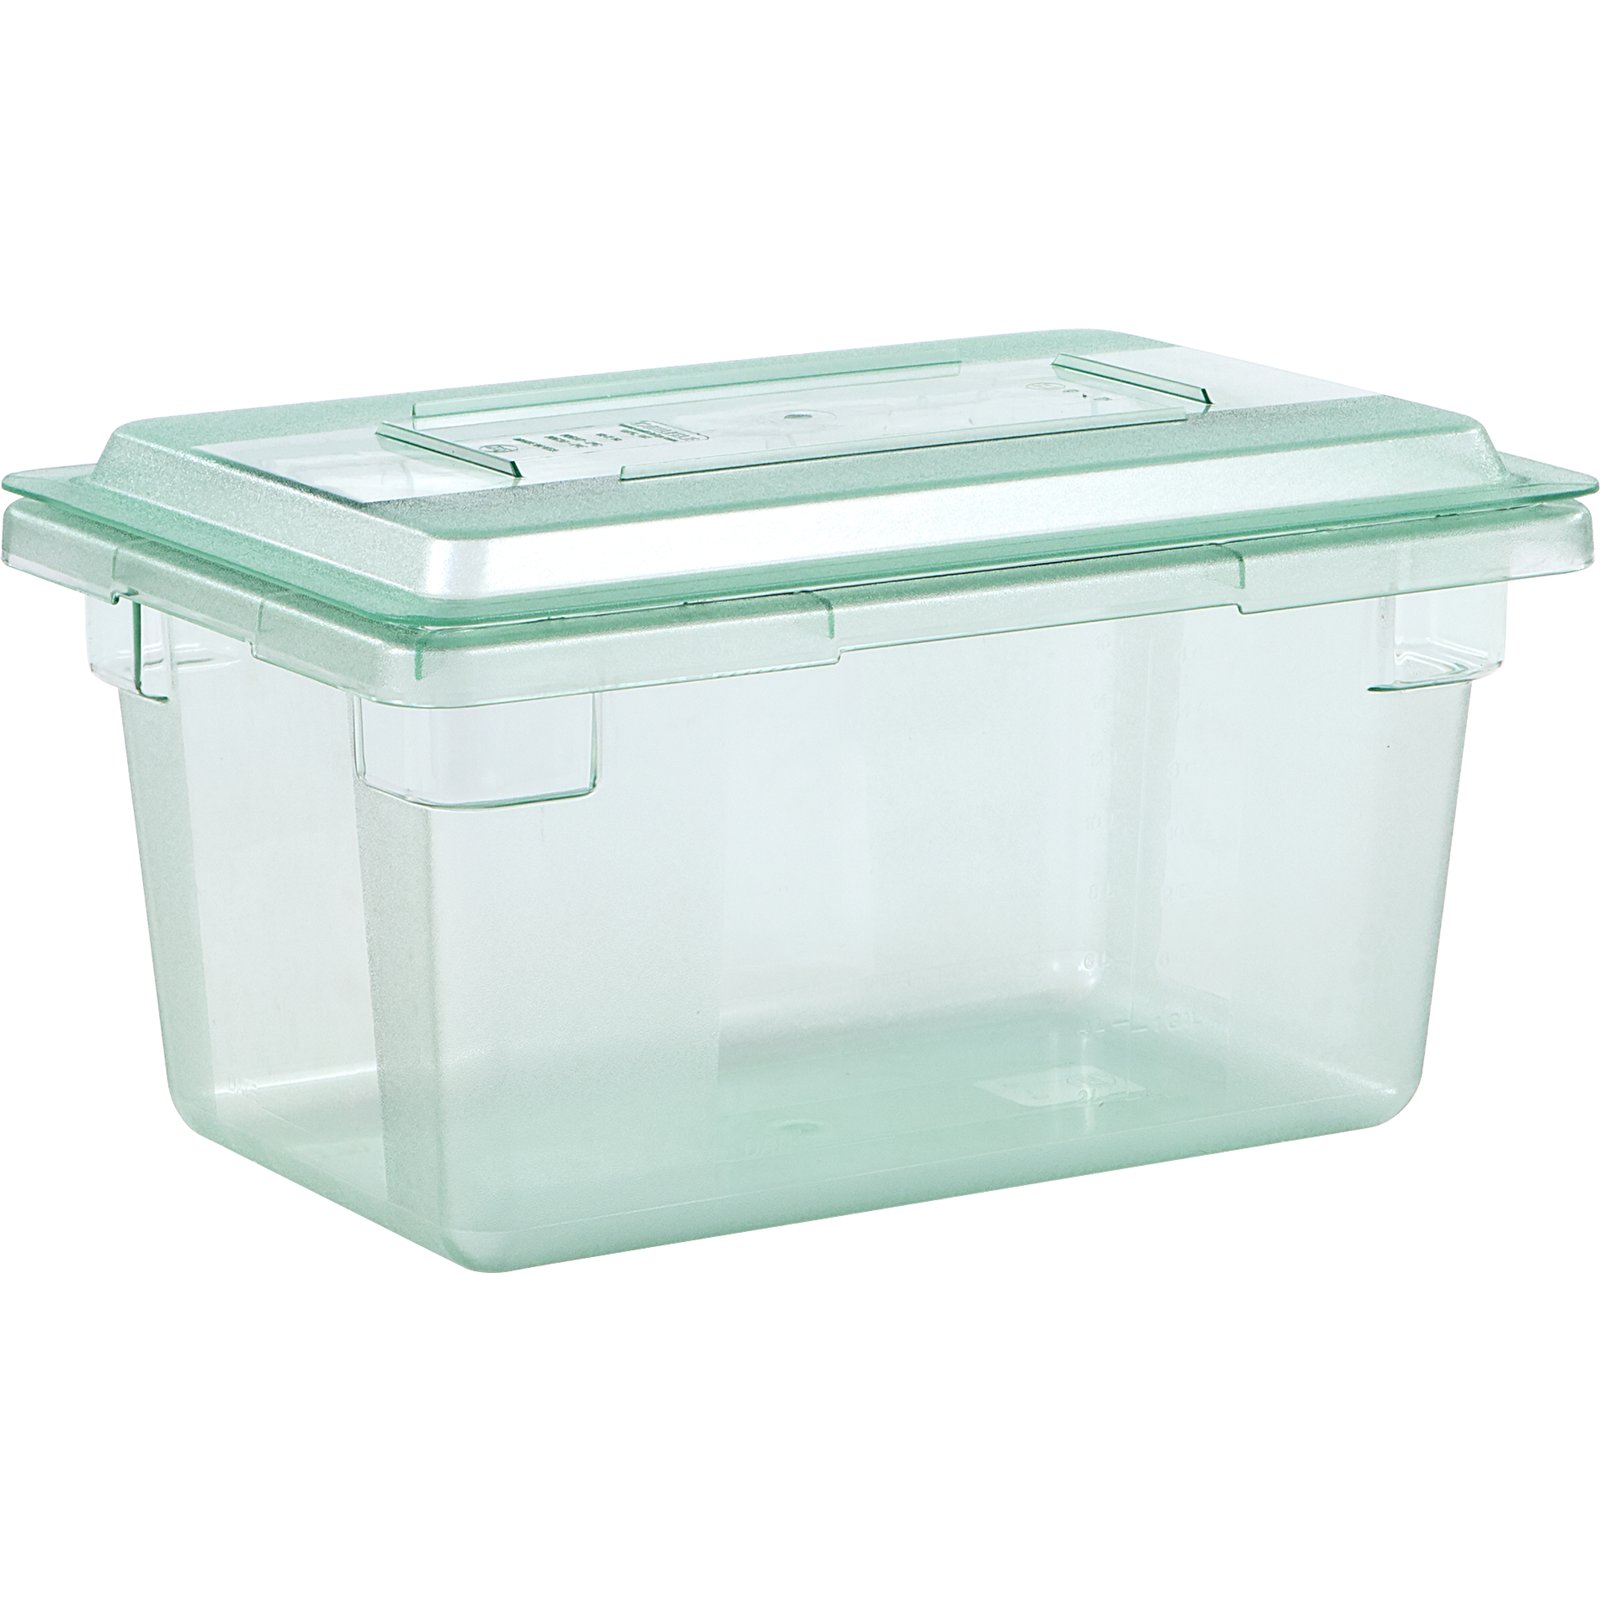 10612C09 - StorPlus™ Color-Coded Food Storage Container 5 gal